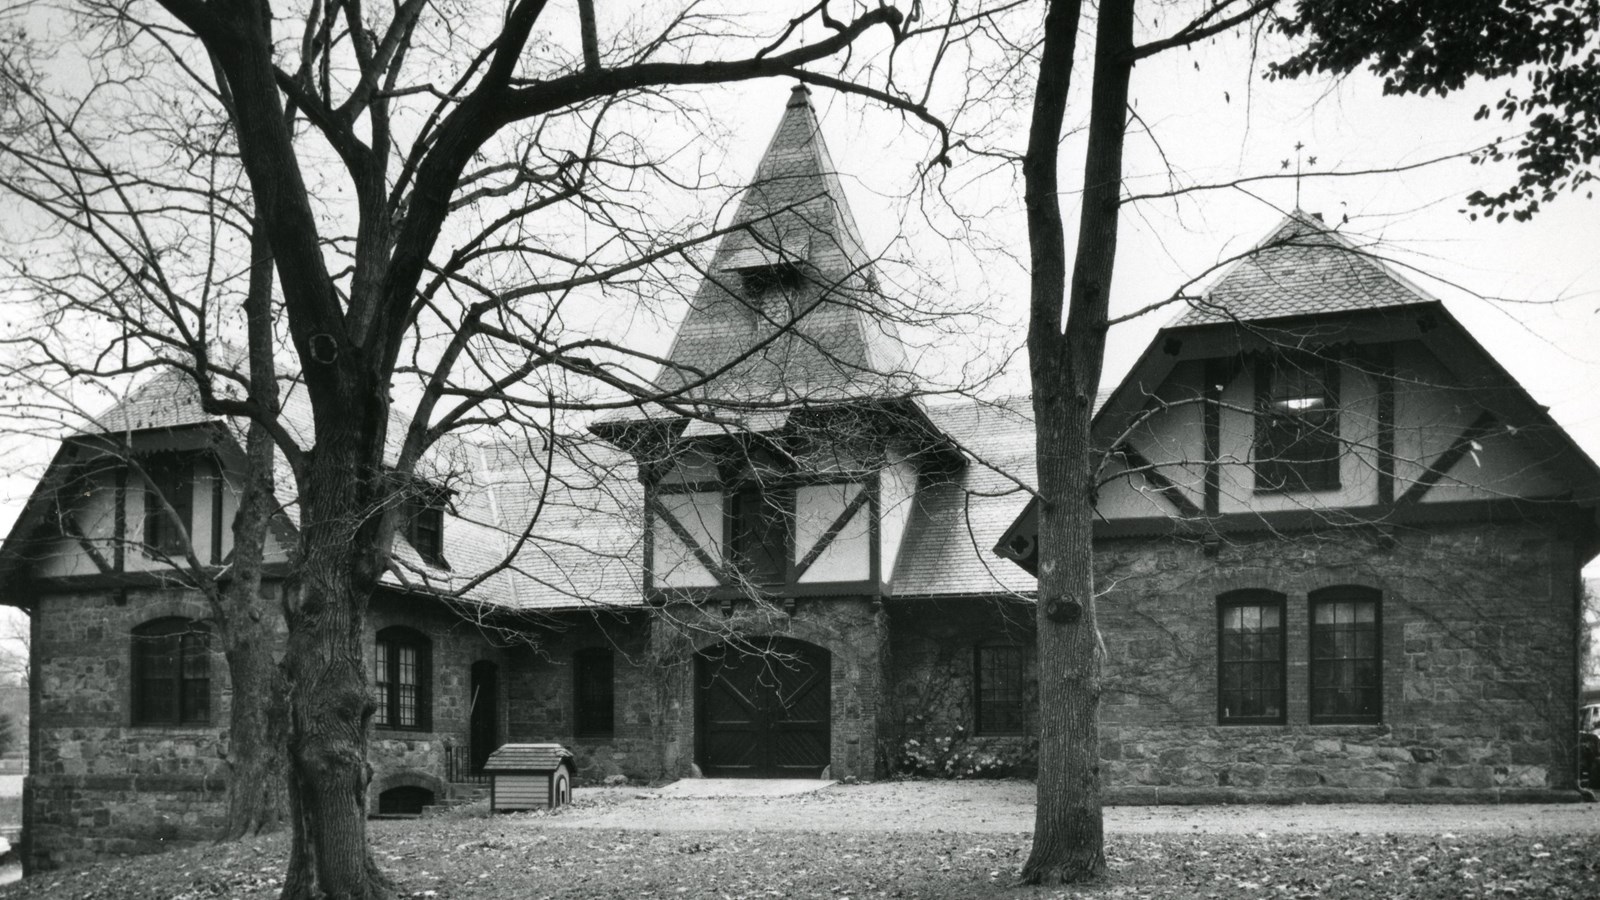 A black and white image of the Carriage House.  A stone building with large barn doors in front.